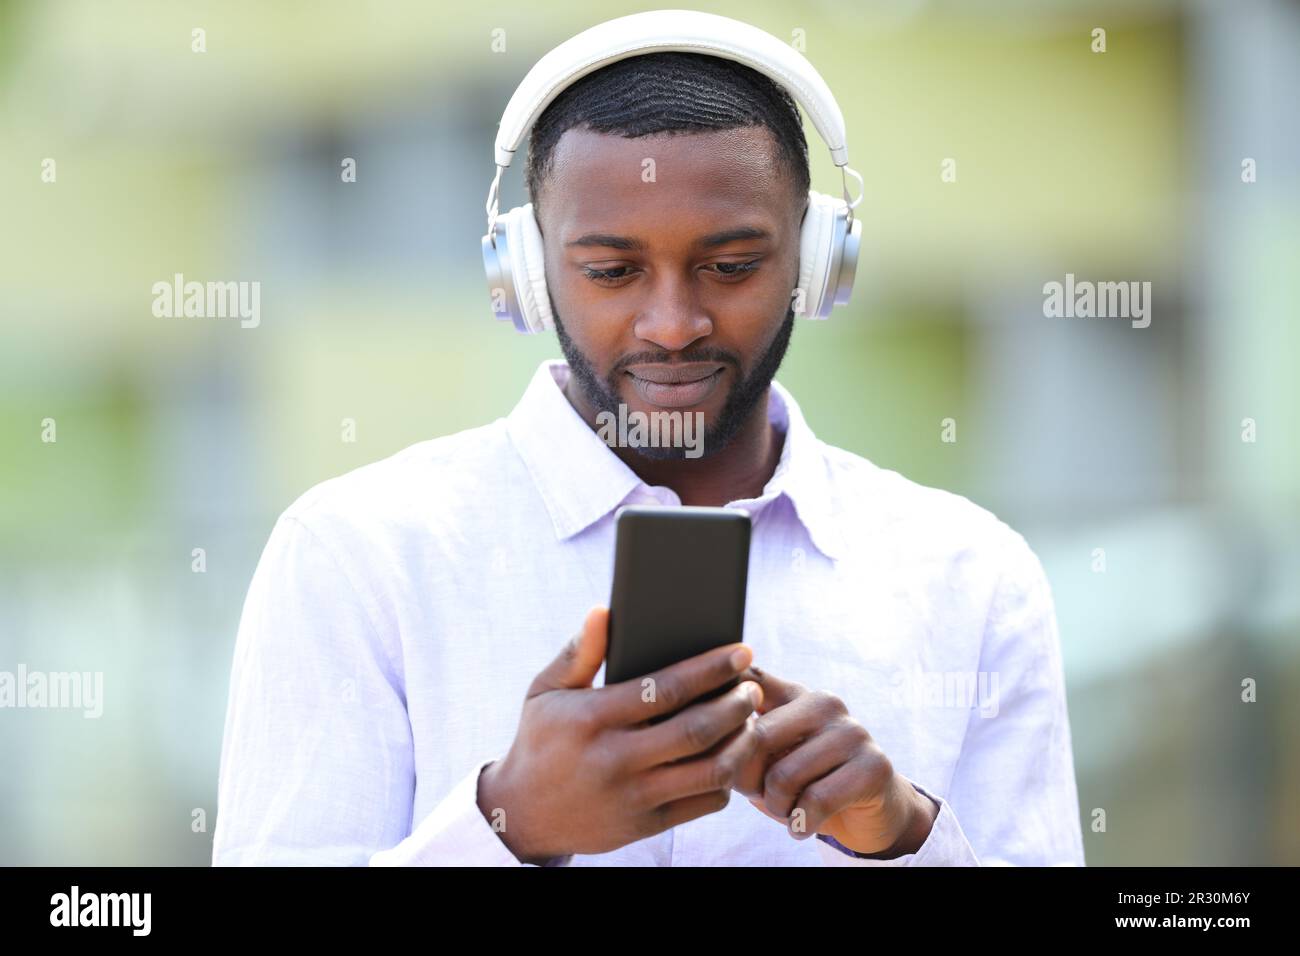 Front view portrait of black man listening to music wearing headphones in the street Stock Photo